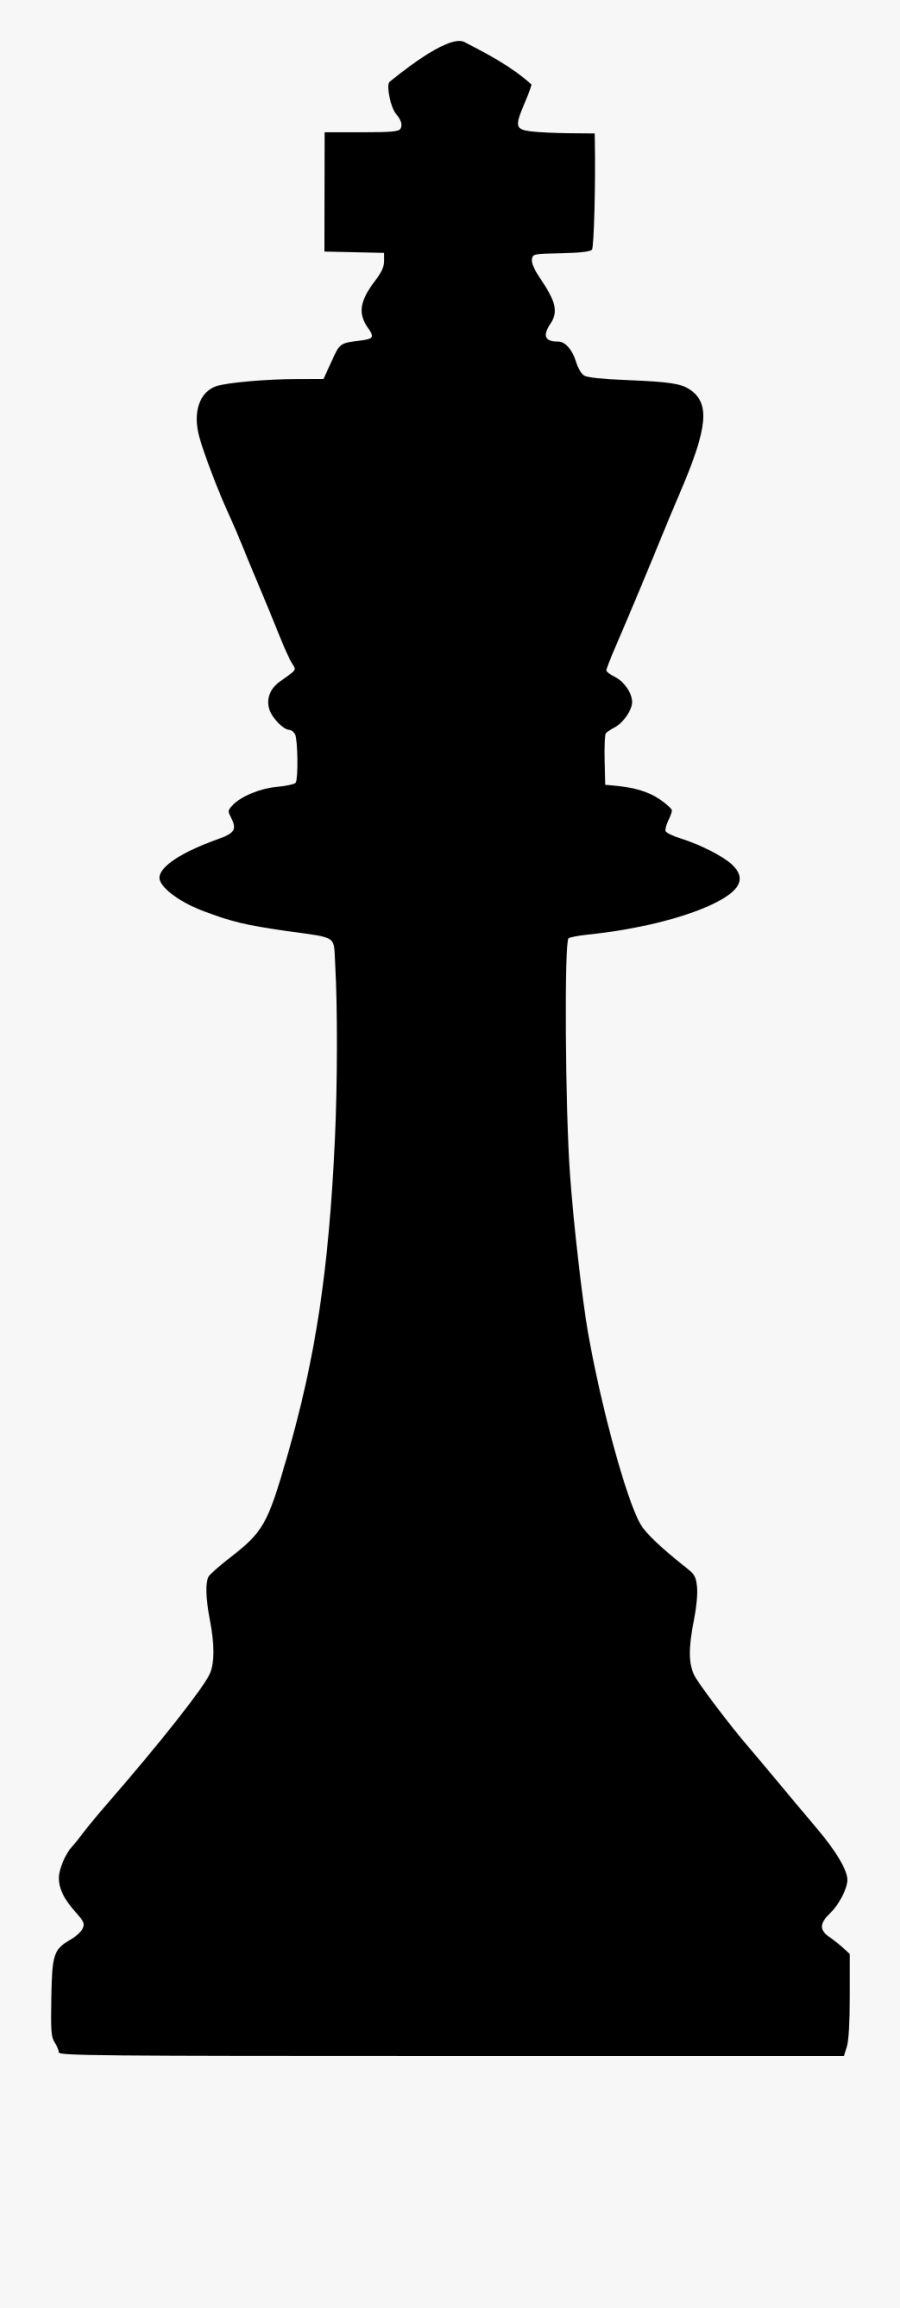 Clipart - Silhouette King Chess Piece, Transparent Clipart